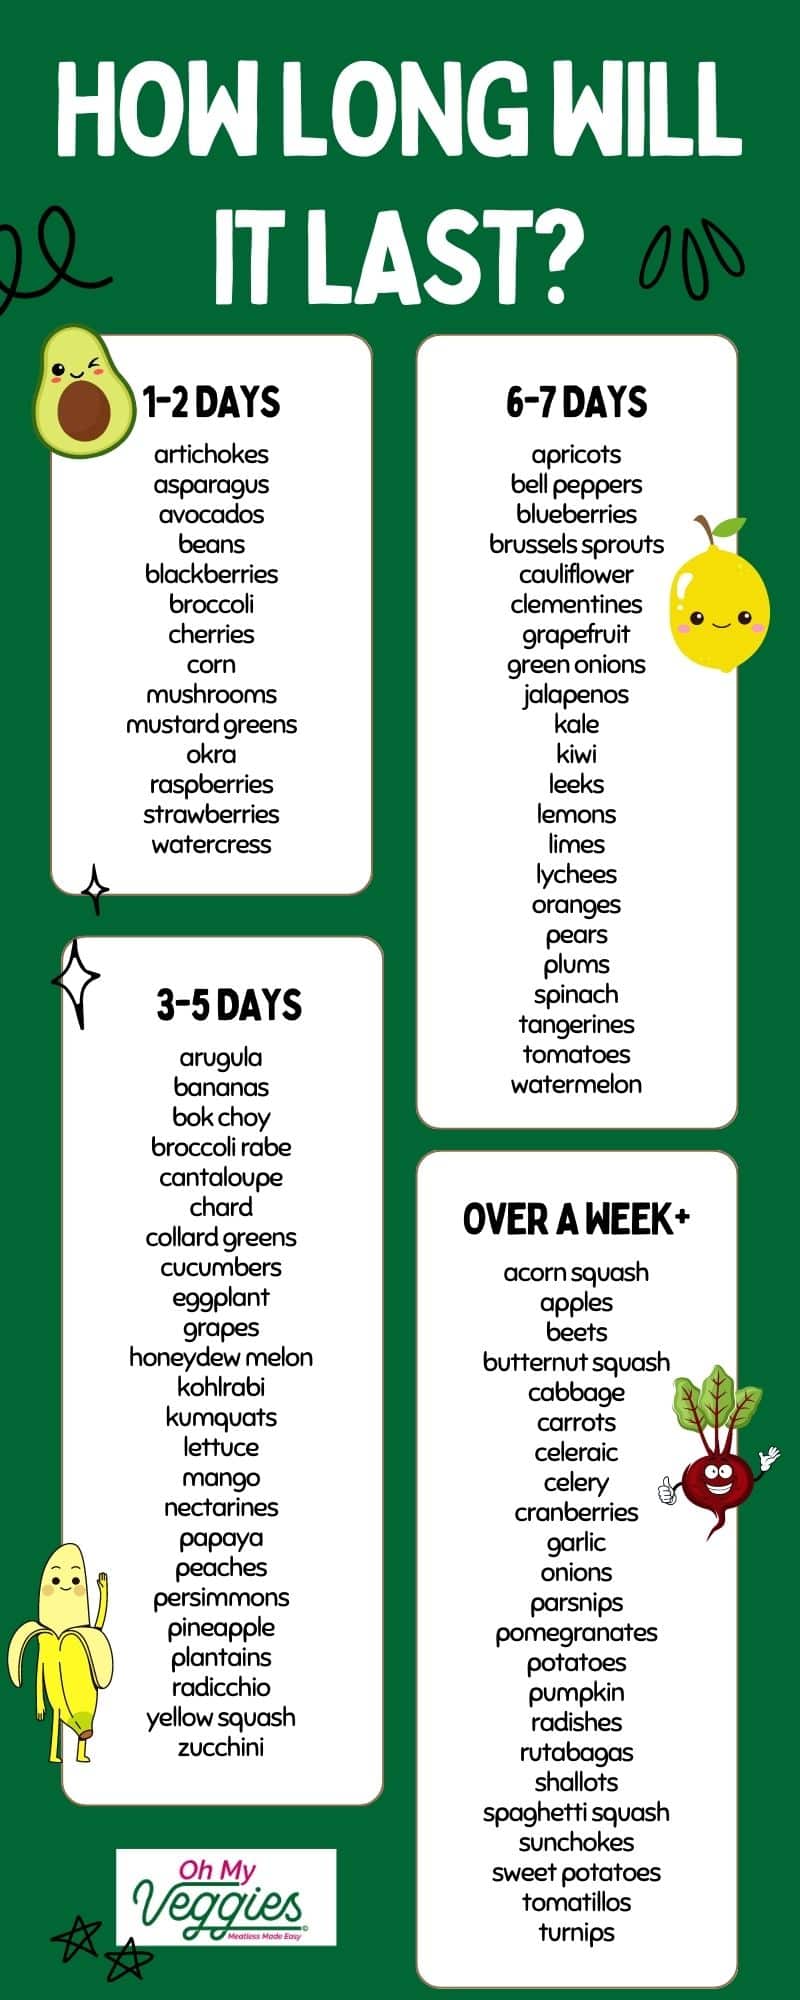 How Long Does It Last? A Printable Guide to How Long Various Fruits and Vegetables Last